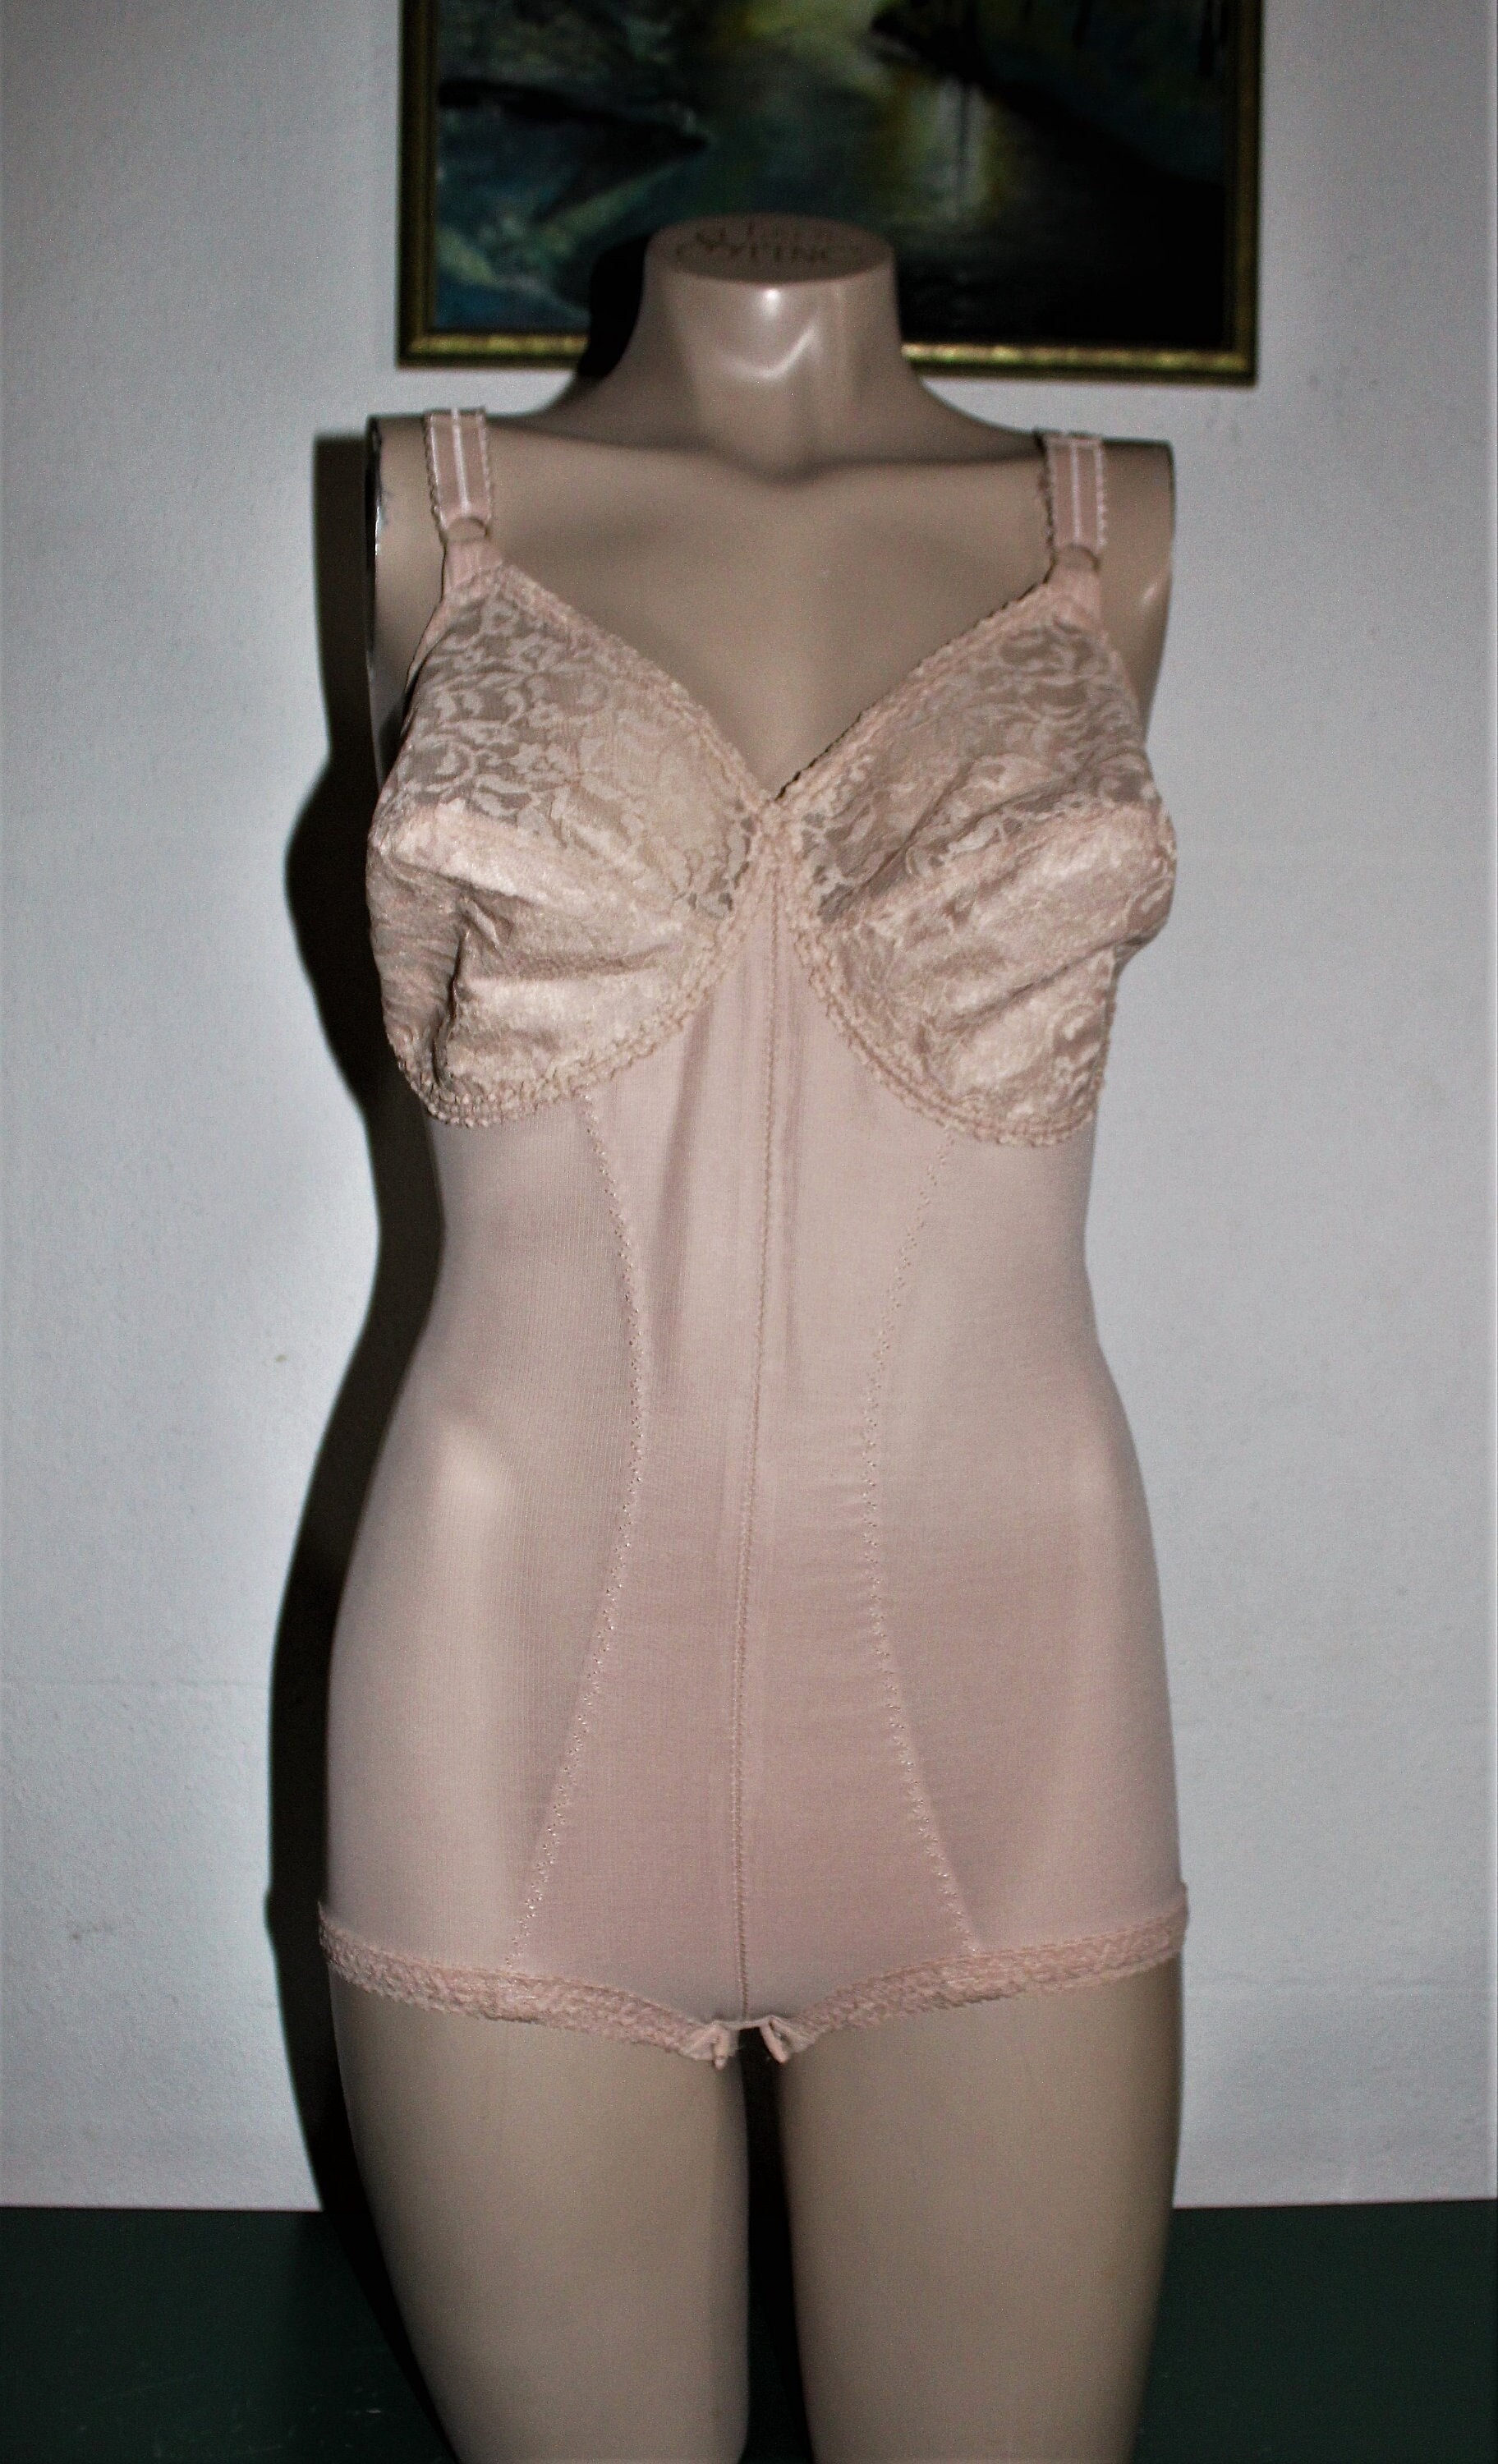 Original Vintage I CAN'T BELIEVE IT'S A GIRDLE All In One 36B Style #2532